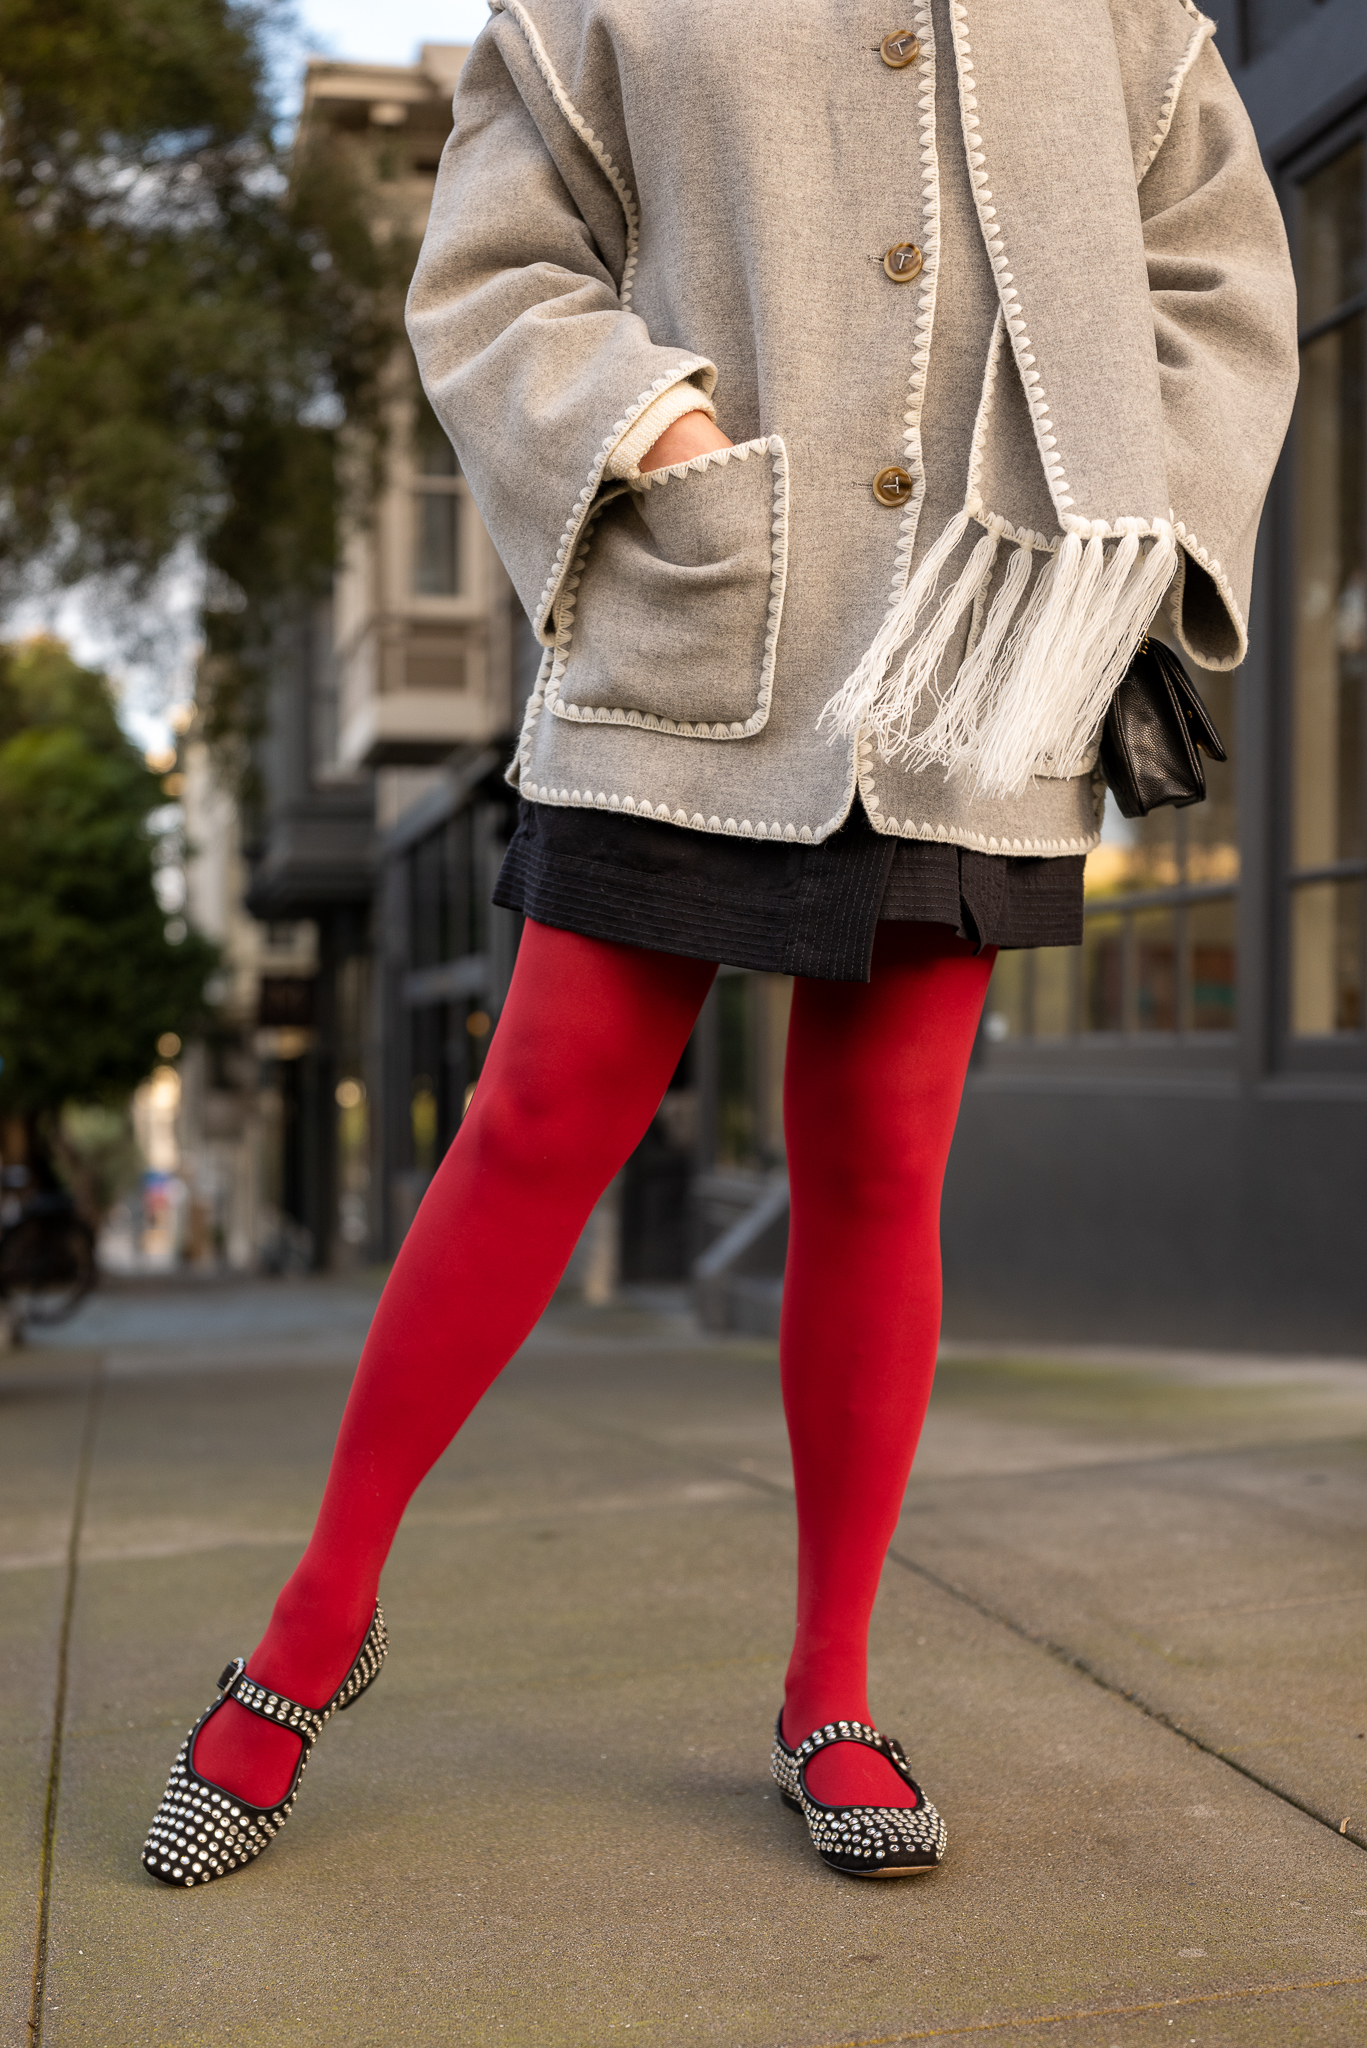 What to wear with red tights - Cheryl Shops